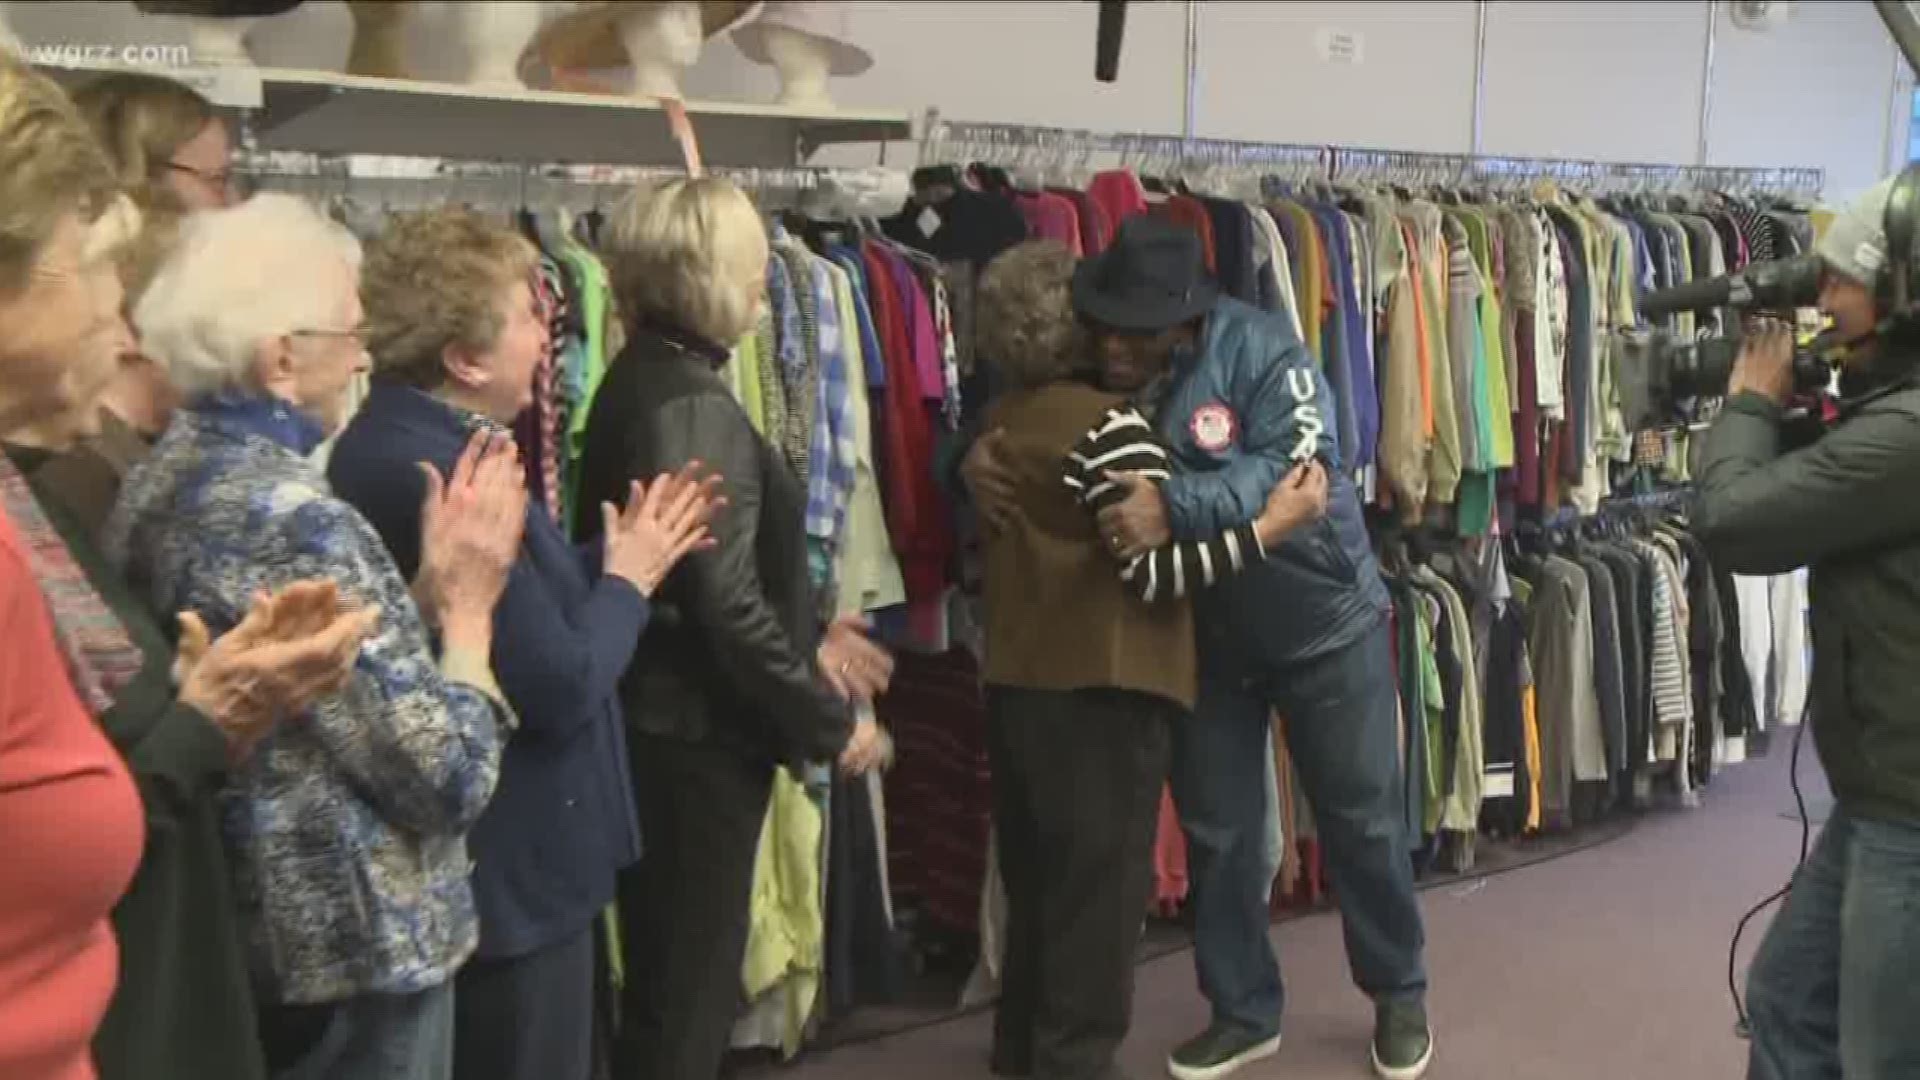 TODAY Show favorite surprises a 96-year-old volunteer with an incredible donation.